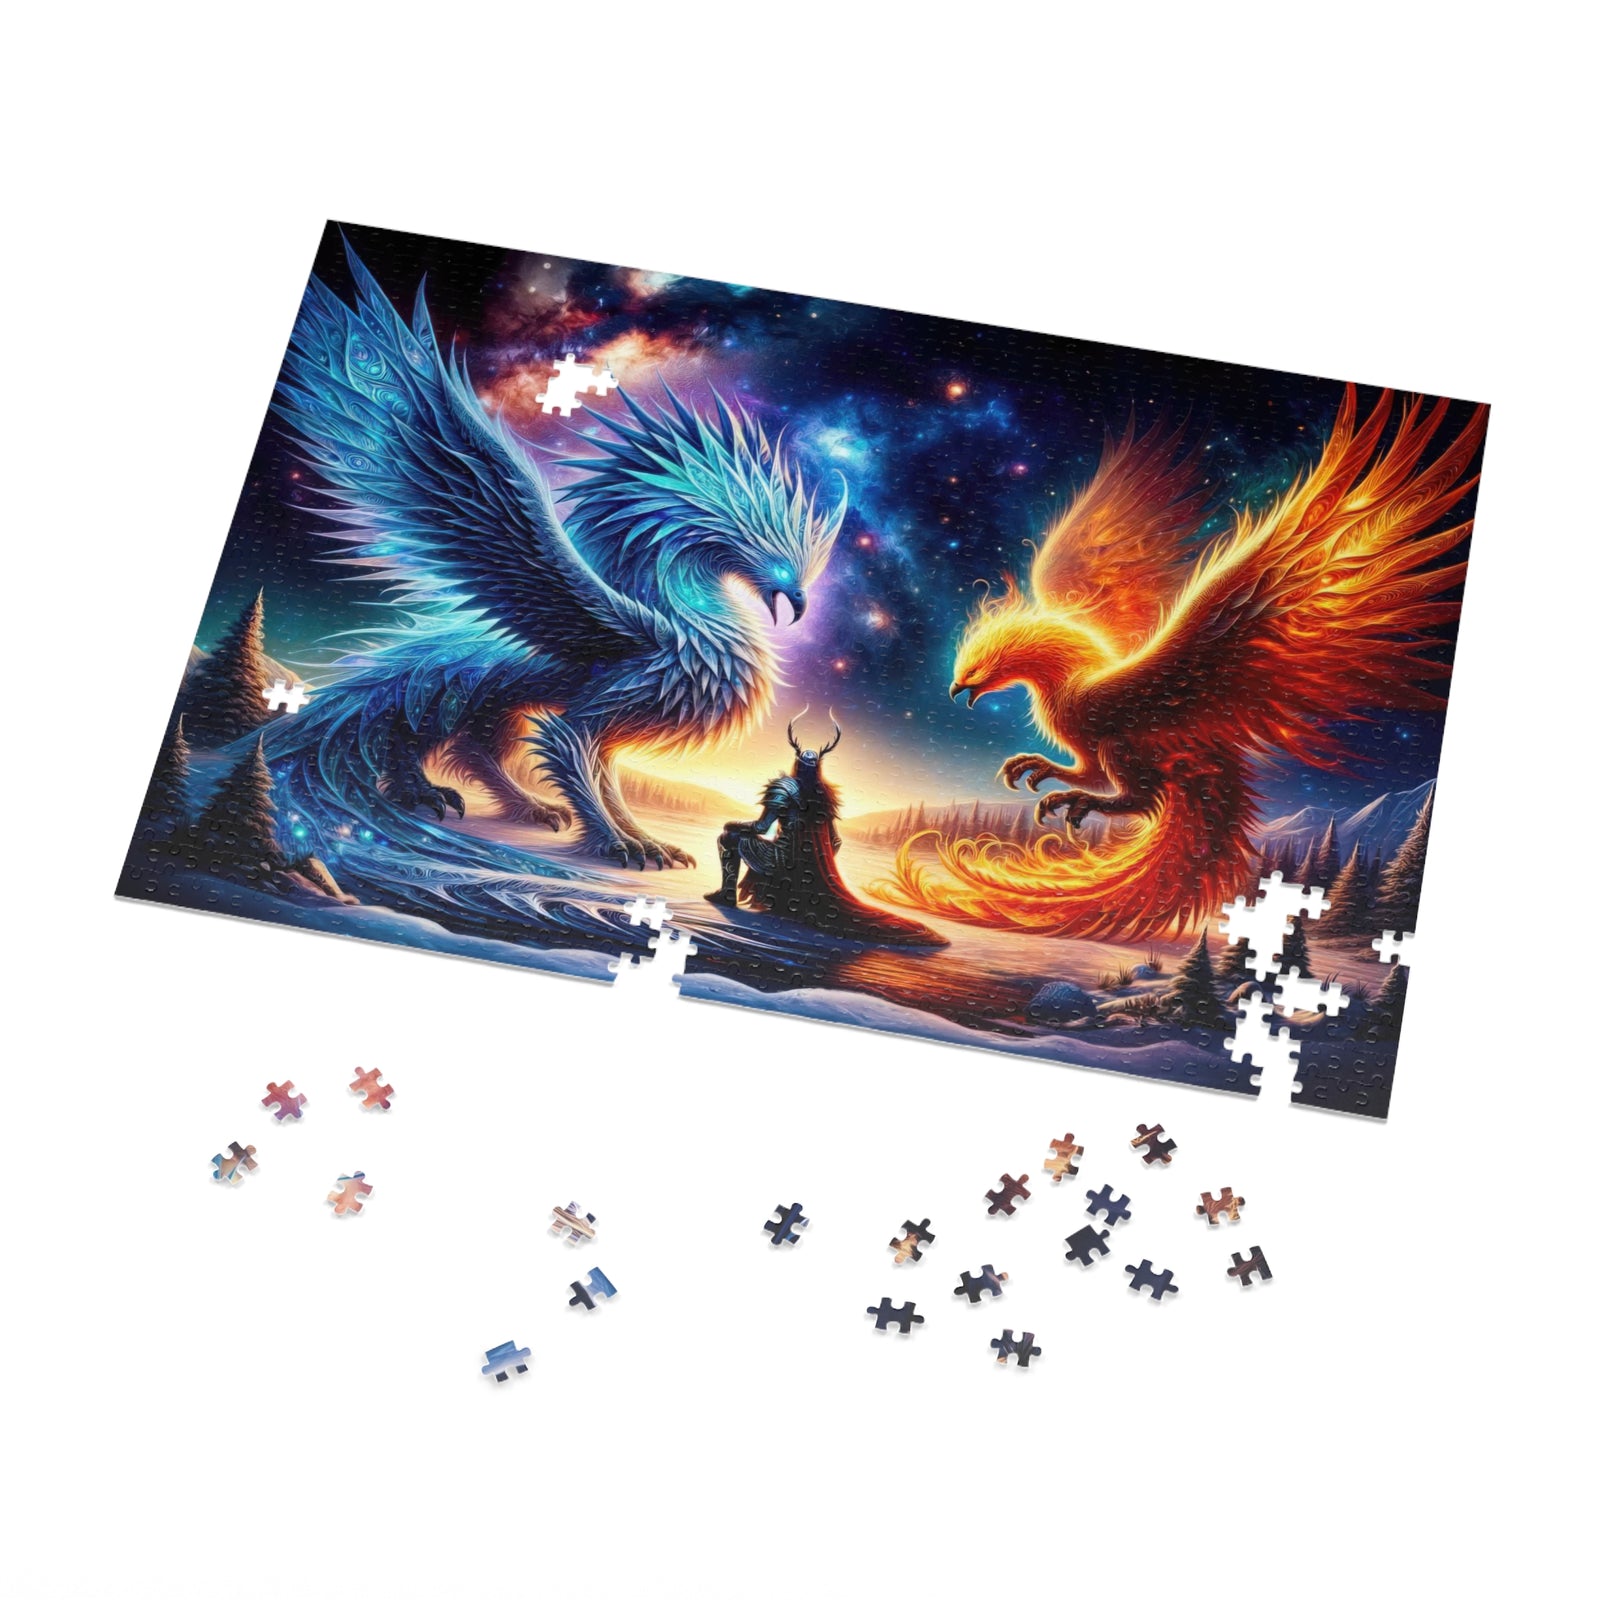 Astral Confrontation Jigsaw Puzzle